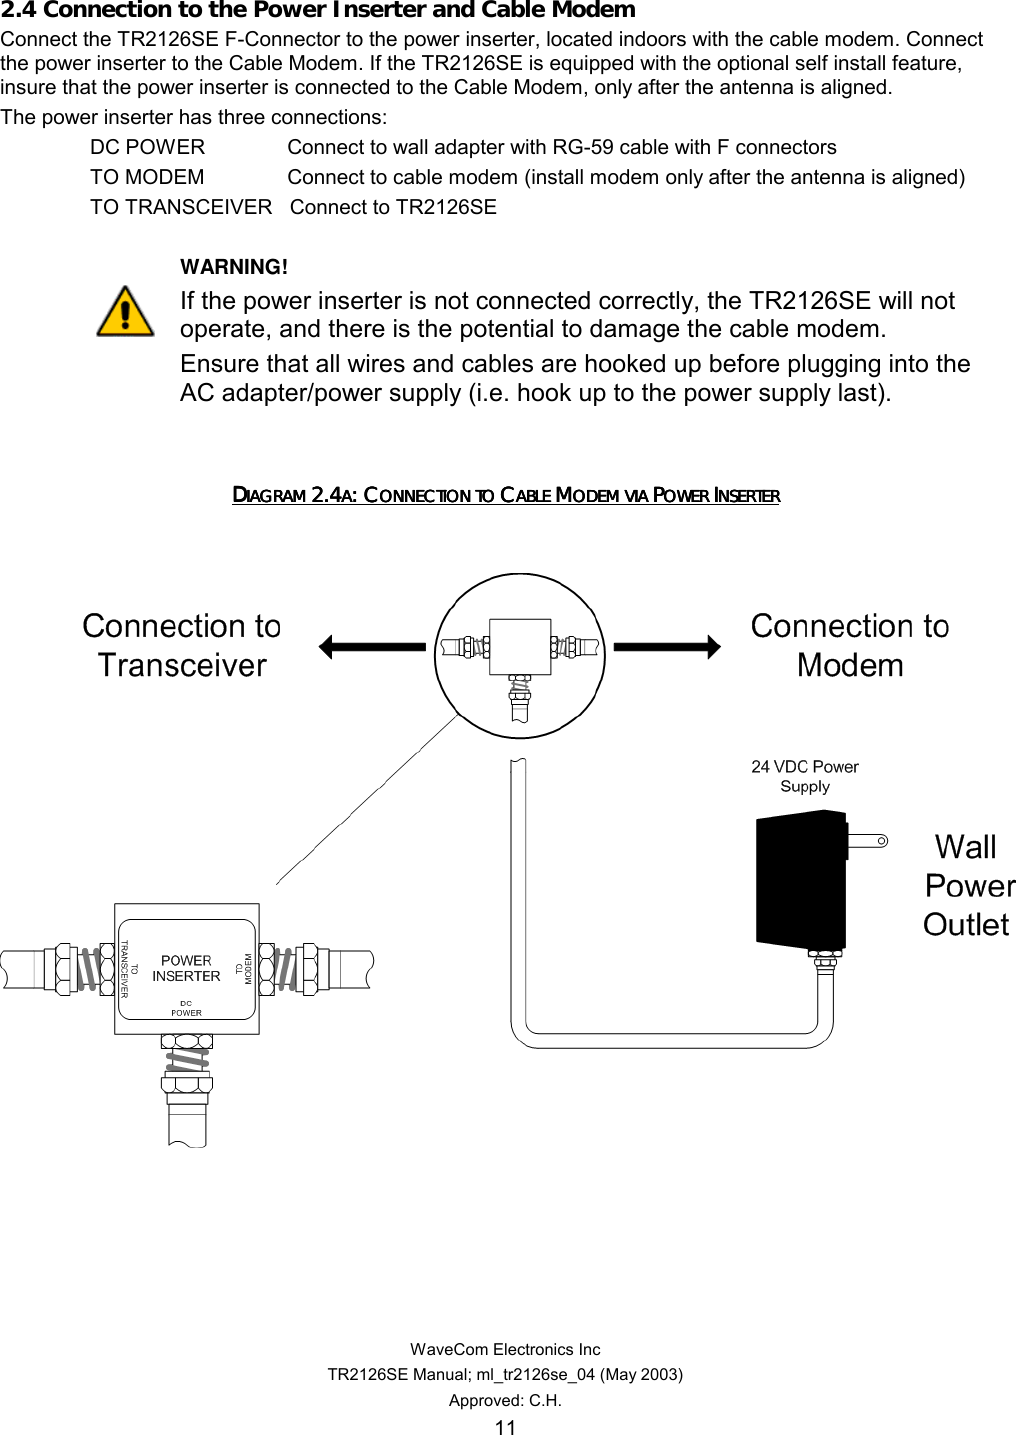   WaveCom Electronics Inc TR2126SE Manual; ml_tr2126se_04 (May 2003) Approved: C.H. 11 2.4 Connection to the Power Inserter and Cable Modem Connect the TR2126SE F-Connector to the power inserter, located indoors with the cable modem. Connect the power inserter to the Cable Modem. If the TR2126SE is equipped with the optional self install feature, insure that the power inserter is connected to the Cable Modem, only after the antenna is aligned.   The power inserter has three connections: DC POWER     Connect to wall adapter with RG-59 cable with F connectors TO MODEM     Connect to cable modem (install modem only after the antenna is aligned) TO TRANSCEIVER   Connect to TR2126SE       WARNING! If the power inserter is not connected correctly, the TR2126SE will not operate, and there is the potential to damage the cable modem.   Ensure that all wires and cables are hooked up before plugging into the AC adapter/power supply (i.e. hook up to the power supply last).     DDDDIAGRAM IAGRAM IAGRAM IAGRAM 2.42.42.42.4AAAA: C: C: C: CONNECTION TO ONNECTION TO ONNECTION TO ONNECTION TO CCCCABLE ABLE ABLE ABLE MMMMODEM VIA ODEM VIA ODEM VIA ODEM VIA PPPPOWER OWER OWER OWER IIIINSERTERNSERTERNSERTERNSERTER        